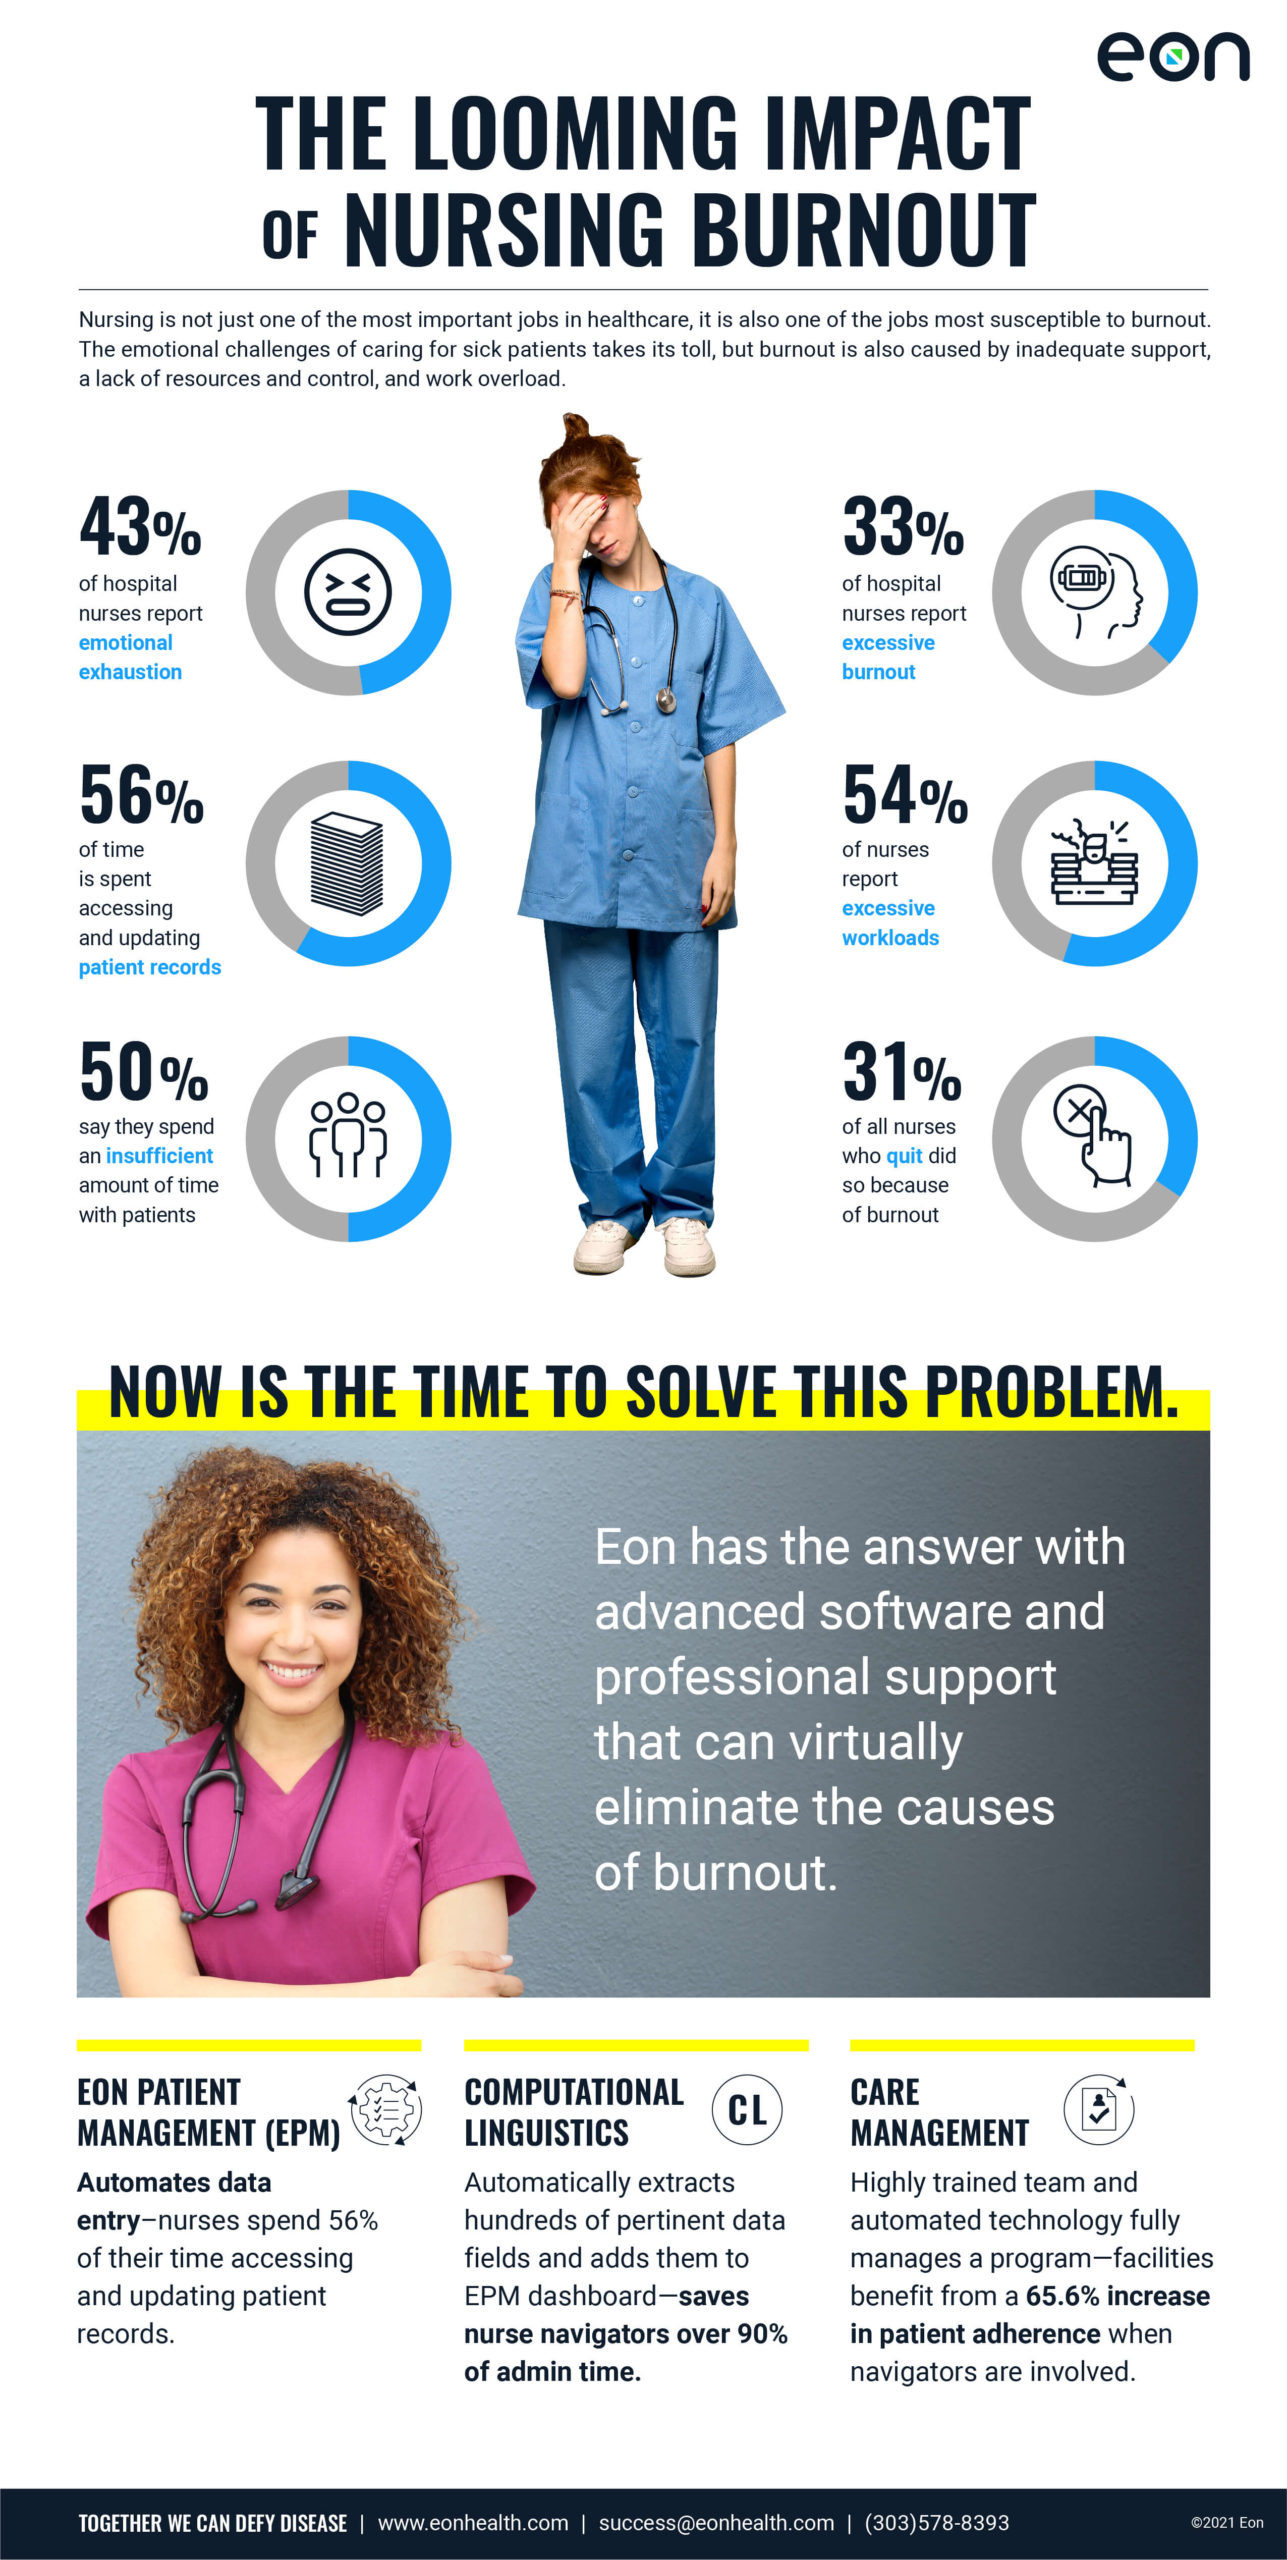 This infographic shows how nursing is not just one of the most important jobs in healthcare, it is also one of the jobs most susceptible to burnout.